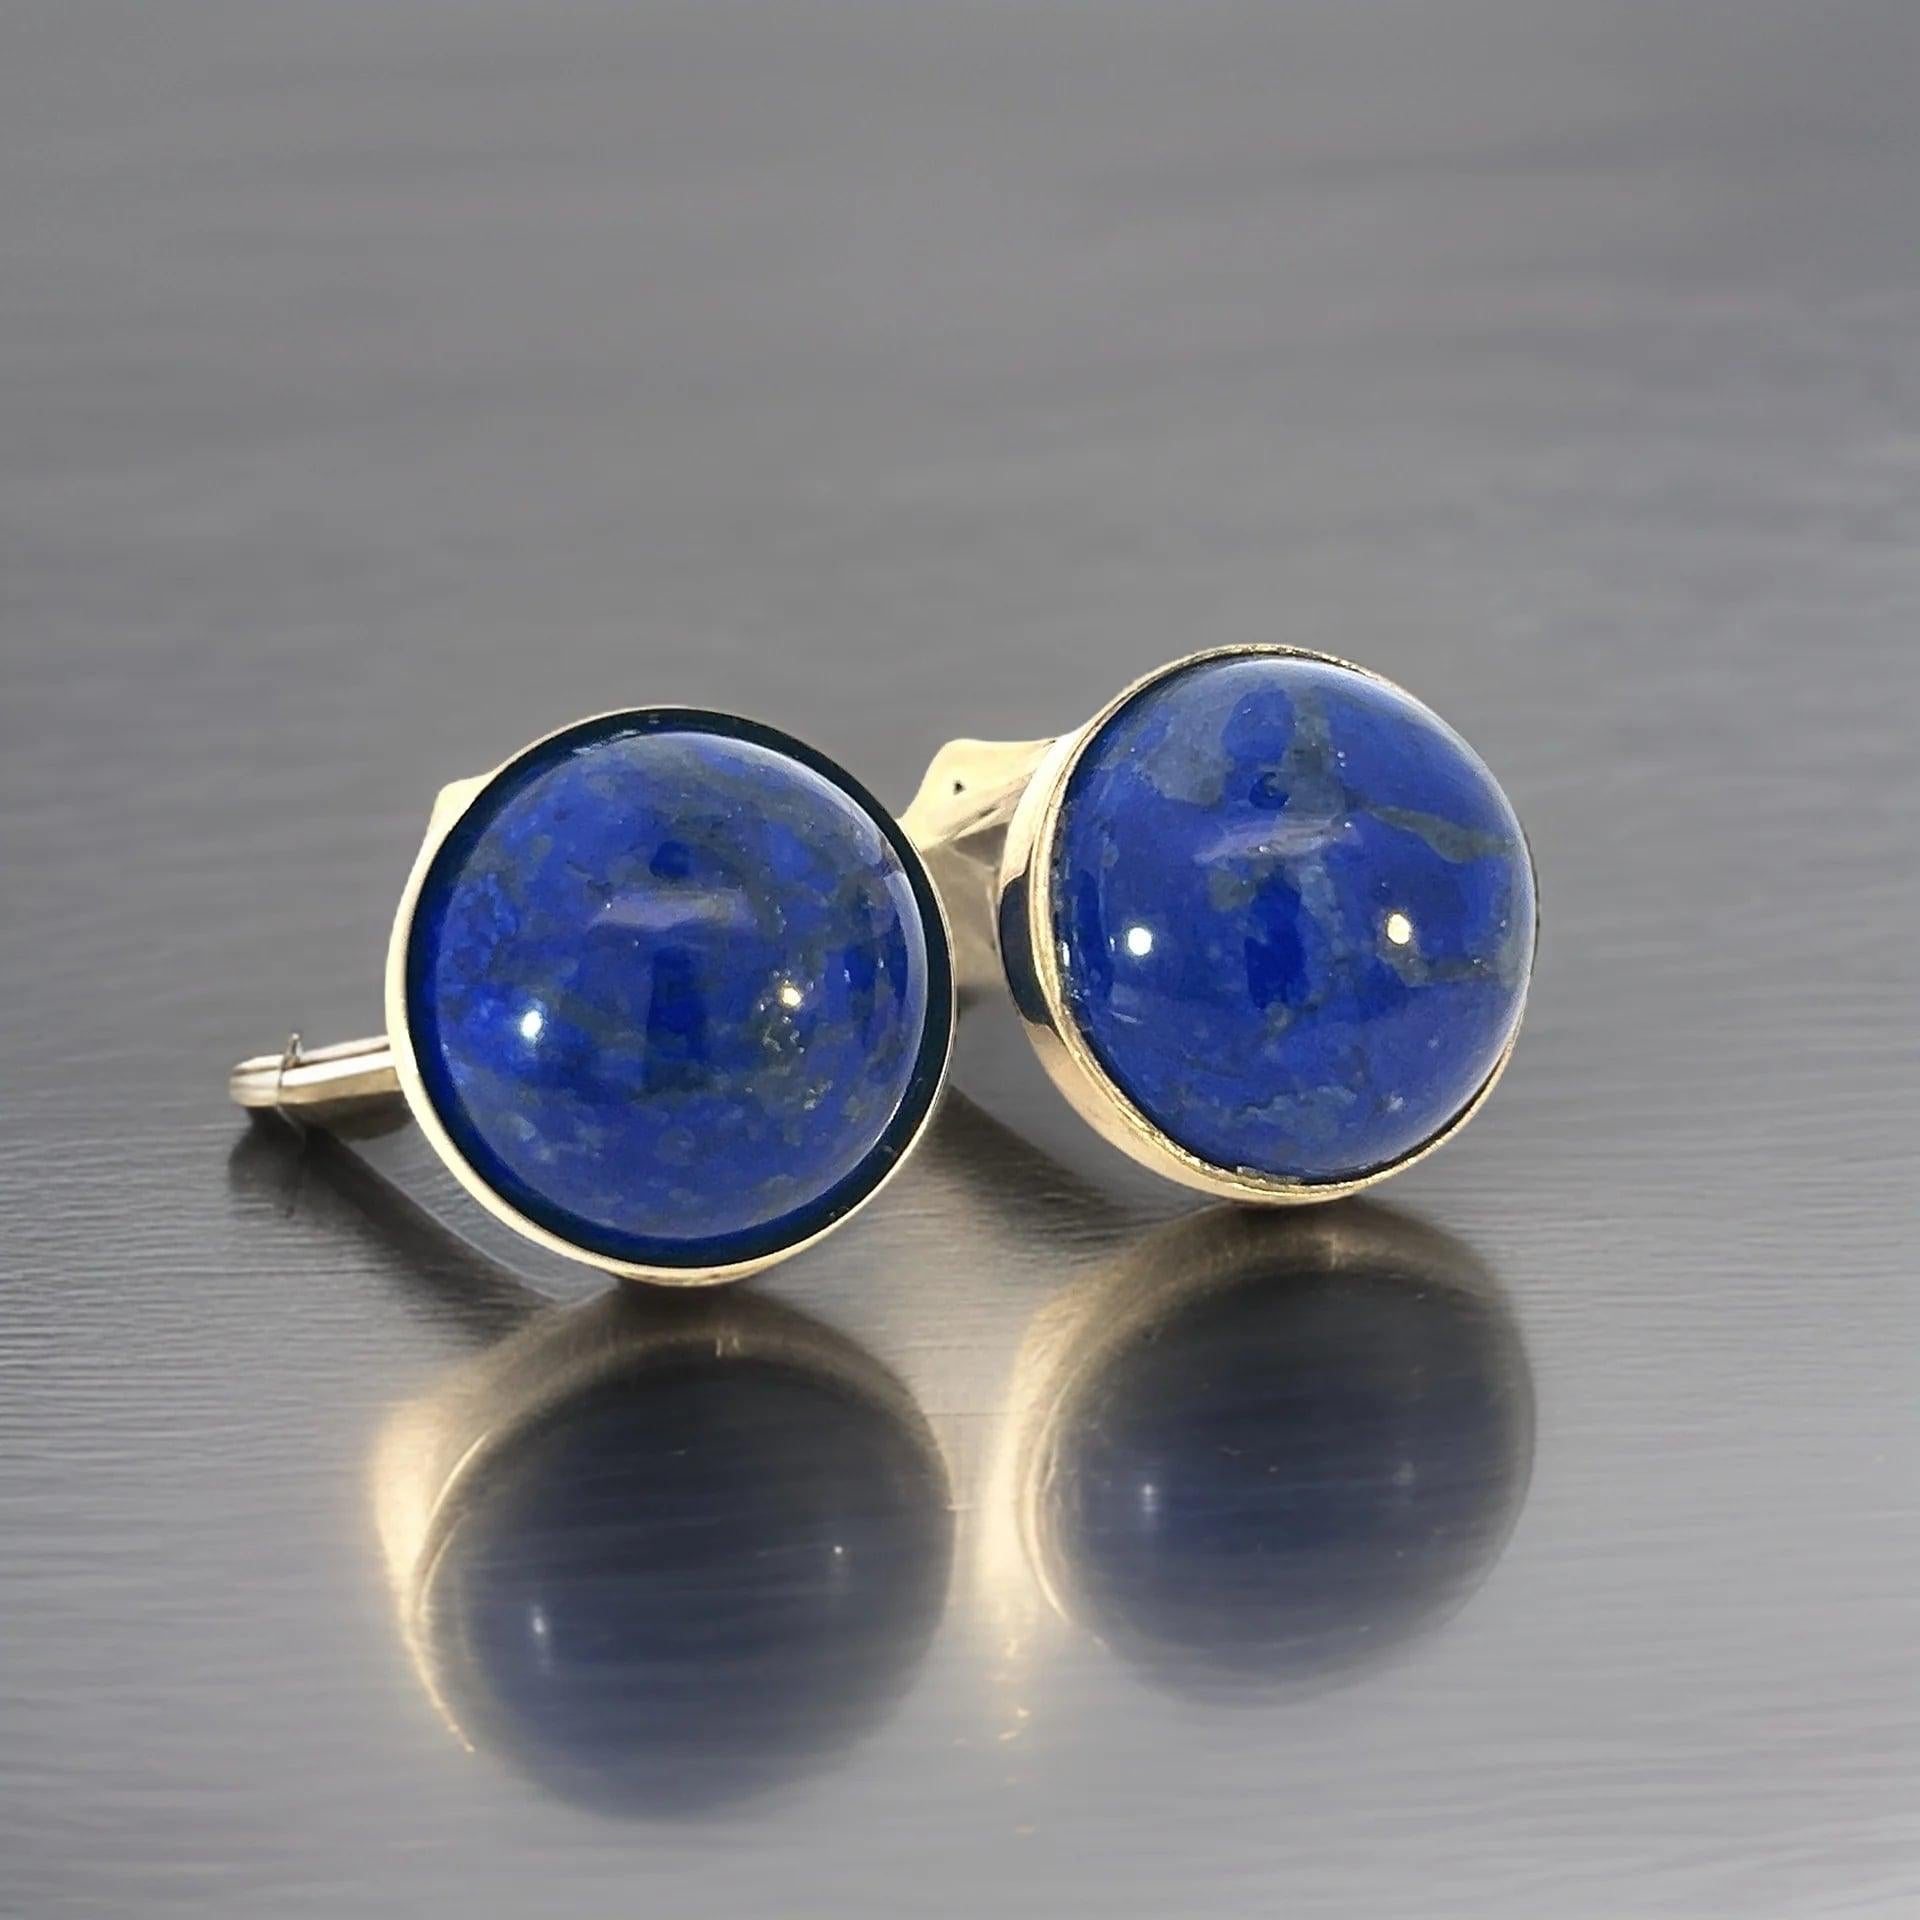 Natural Finely Faceted Quality Lapis Lazuli Cufflinks 14k Y Gold 40 CTW Certified $3,450 311039

This is a Unique Custom Made Glamorous Piece of Jewelry!

Nothing says, “I Love you” more than Diamonds and Pearls!

These Lapis Lazuli Cufflinks have